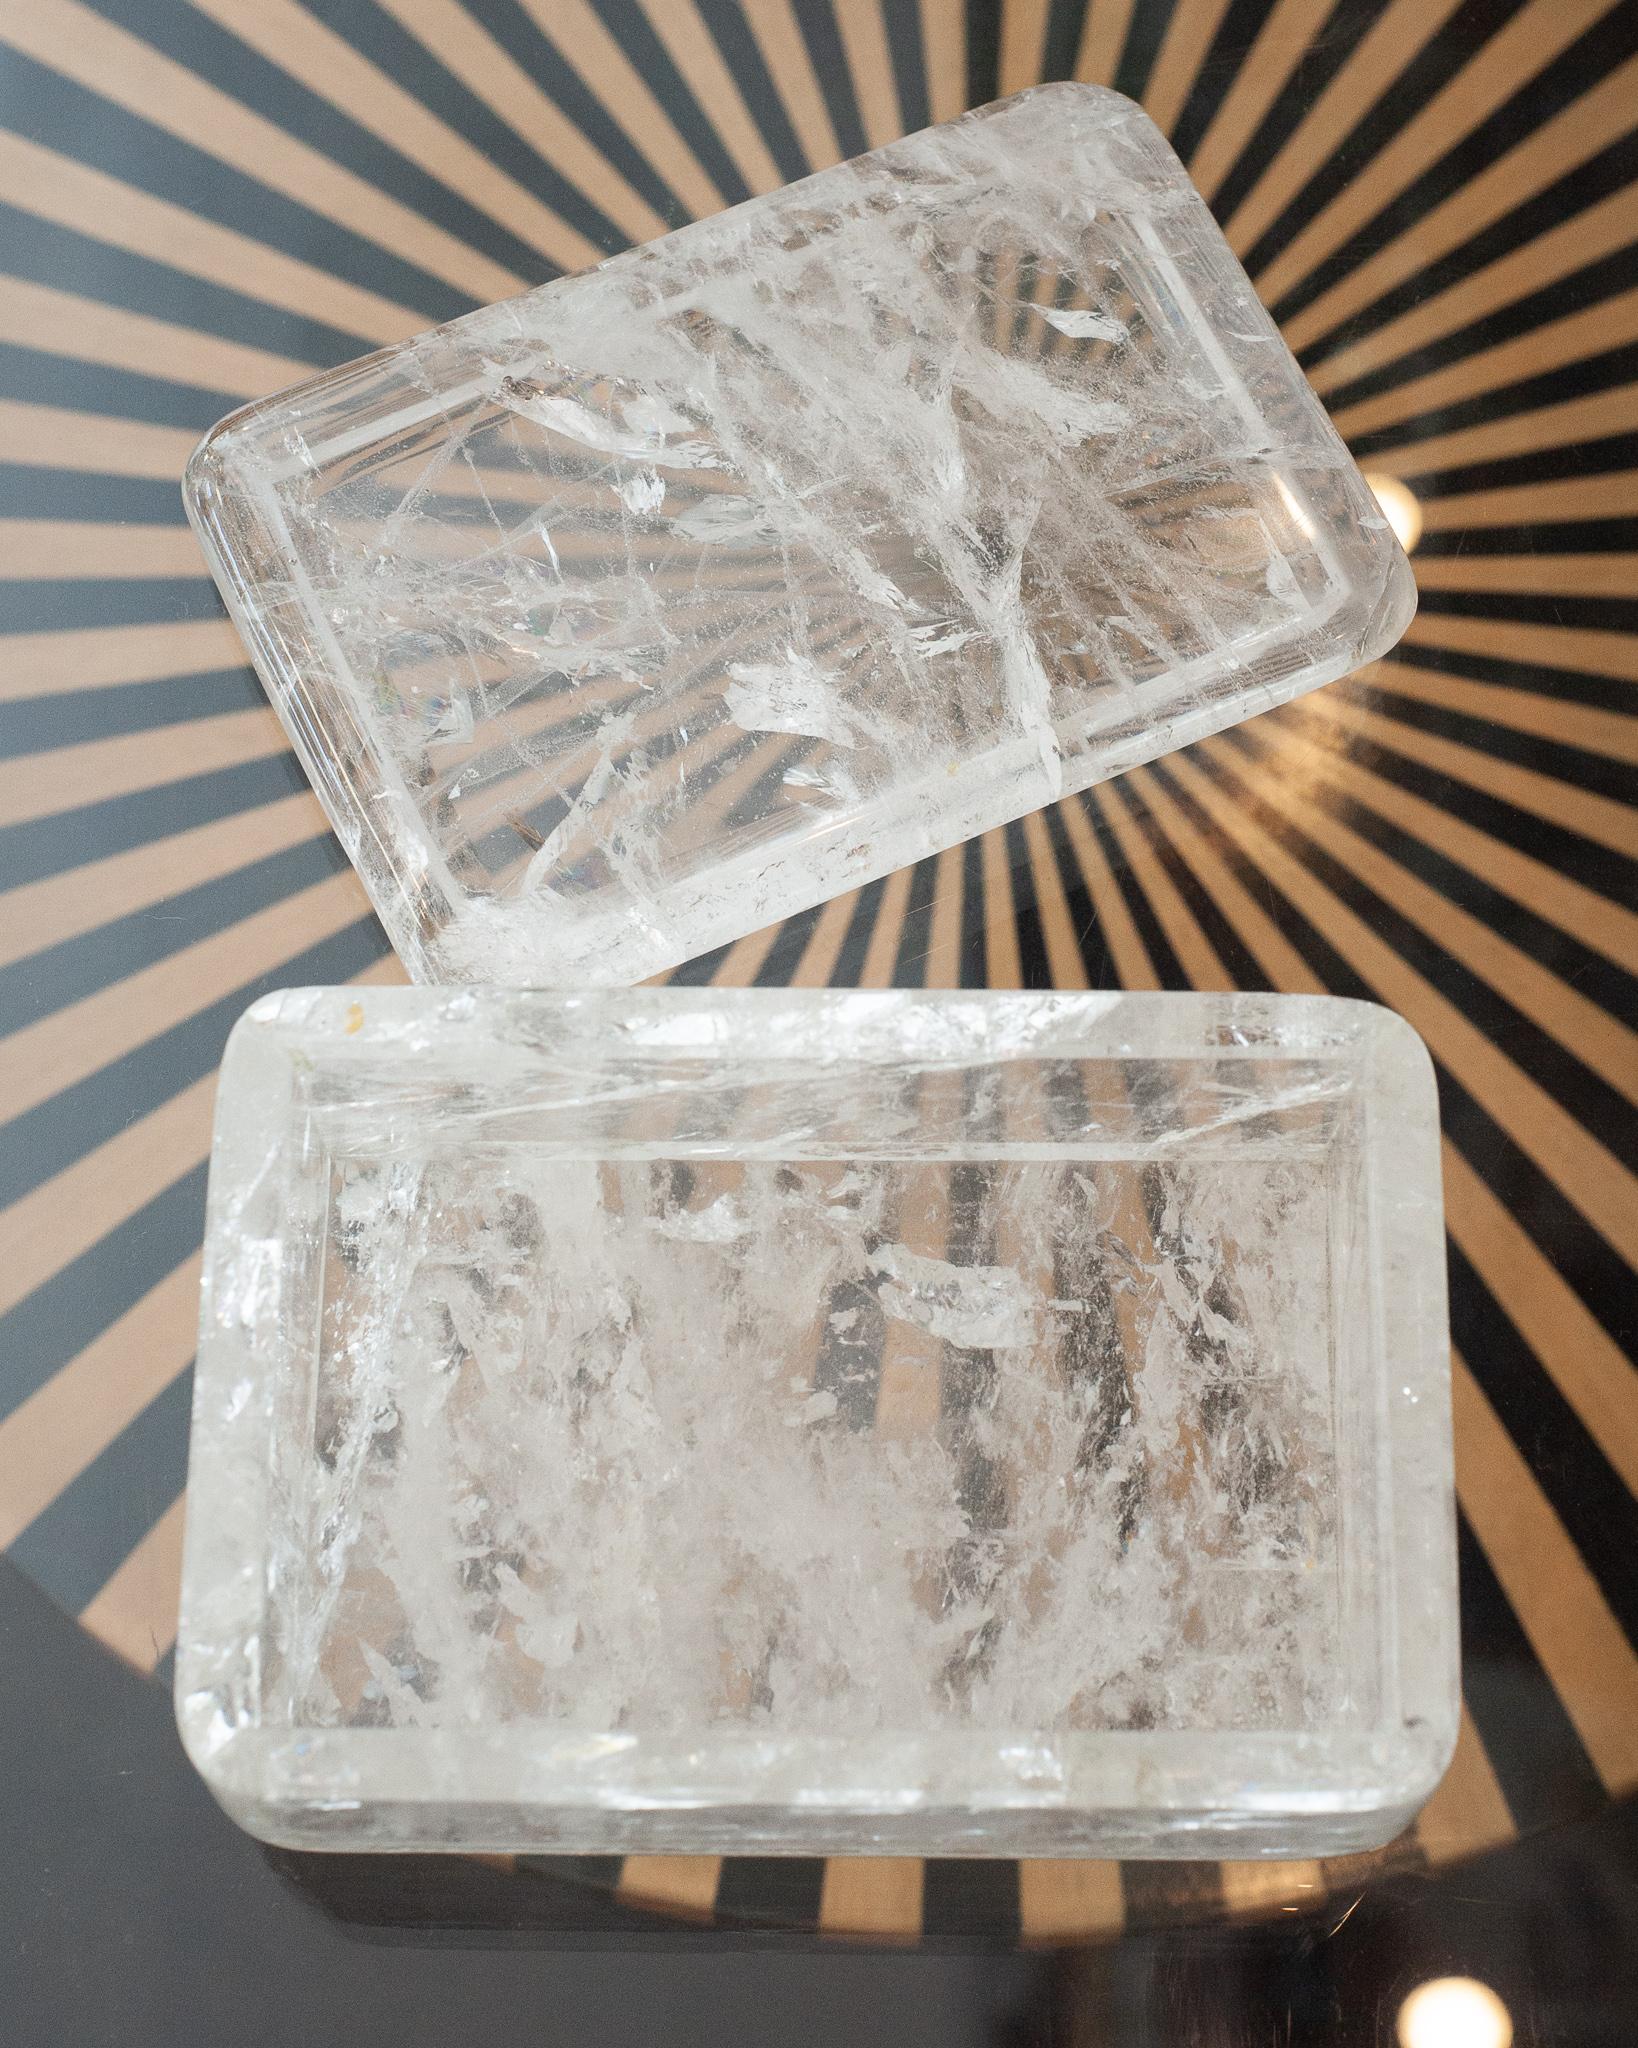 A stunning contemporary medium clear quartz rock crystal box. Beautifully carved by hand in an exceptional quality and clarity of rock crystal. Newly produced in the gem rich city of Minas Gerais, Brazil.